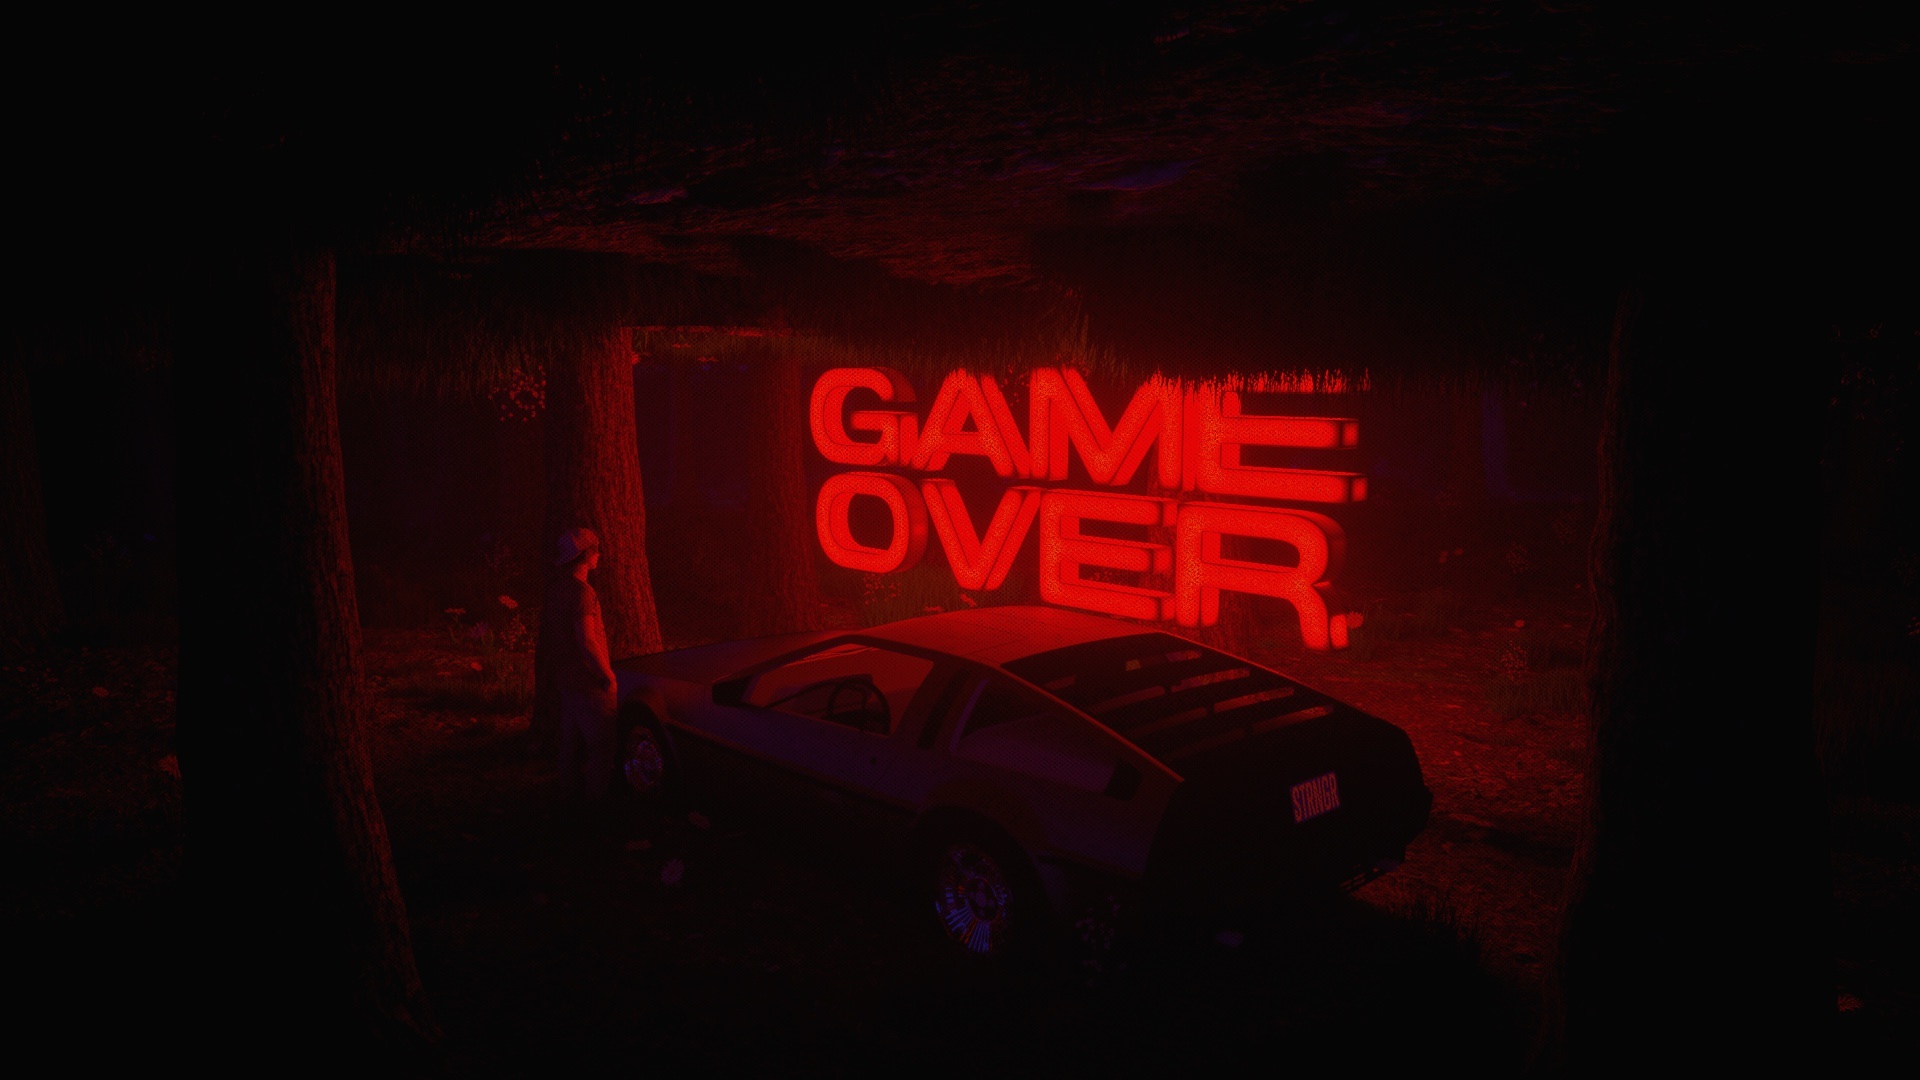 Game Over, High quality, Stunning visuals, Detailed, 1920x1080 Full HD Desktop